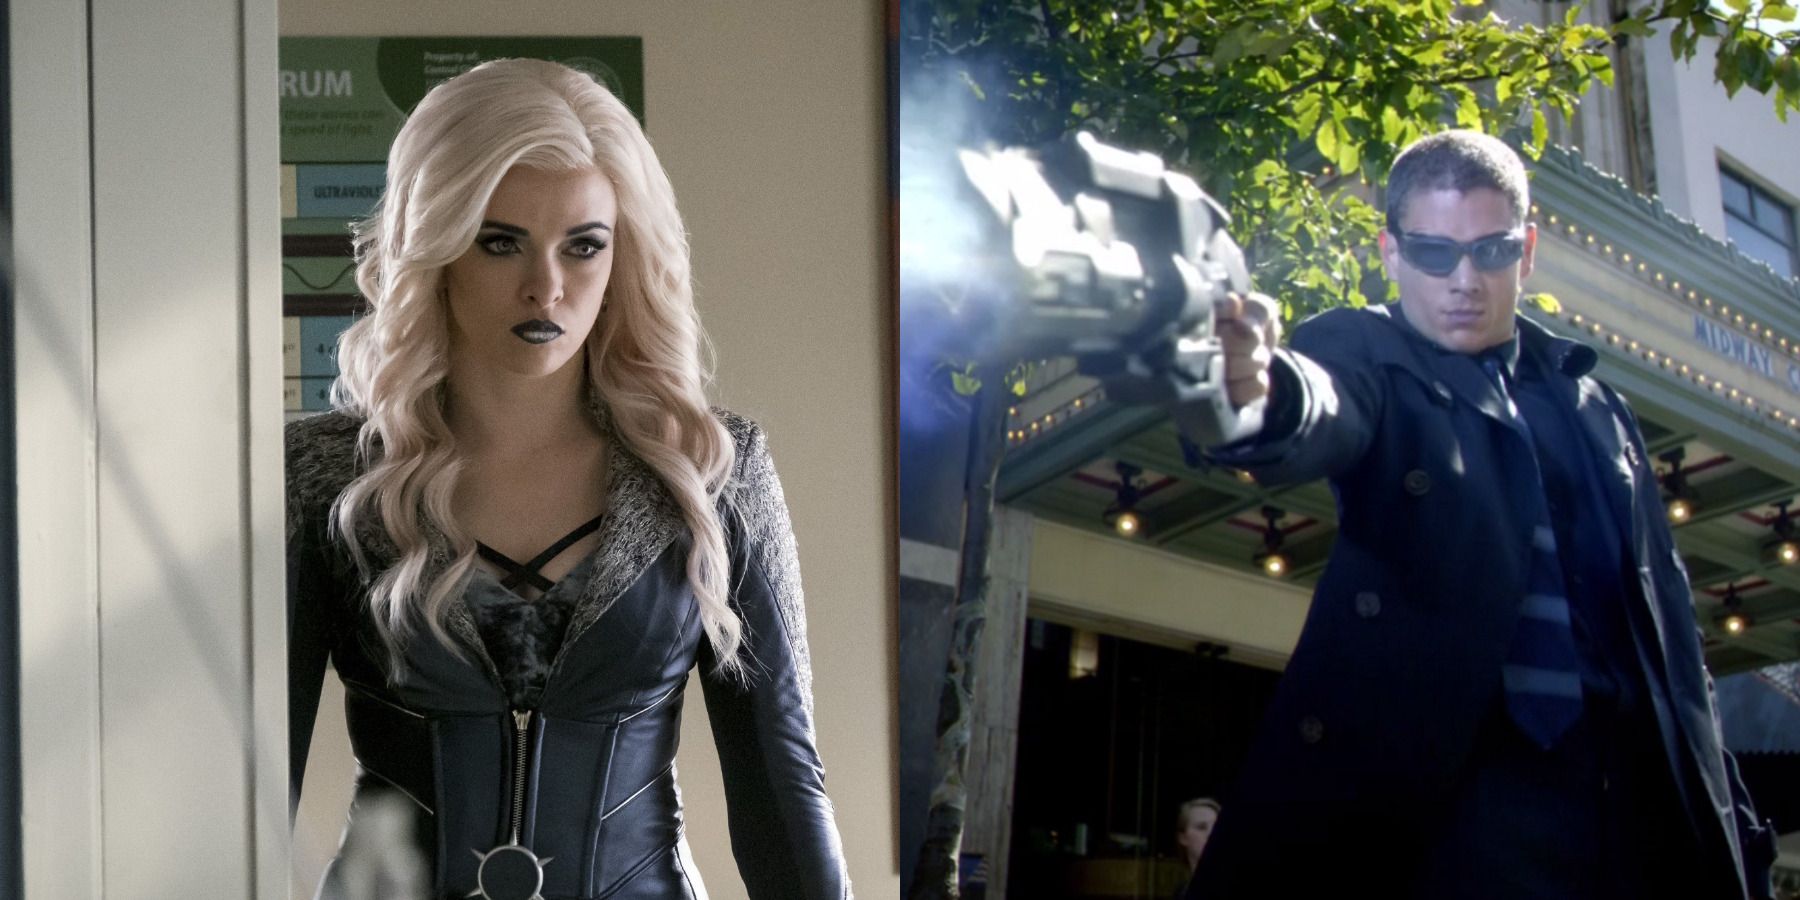 The Flash villain feature split image Killer Frost confronts the team and Captain Cold uses his gun